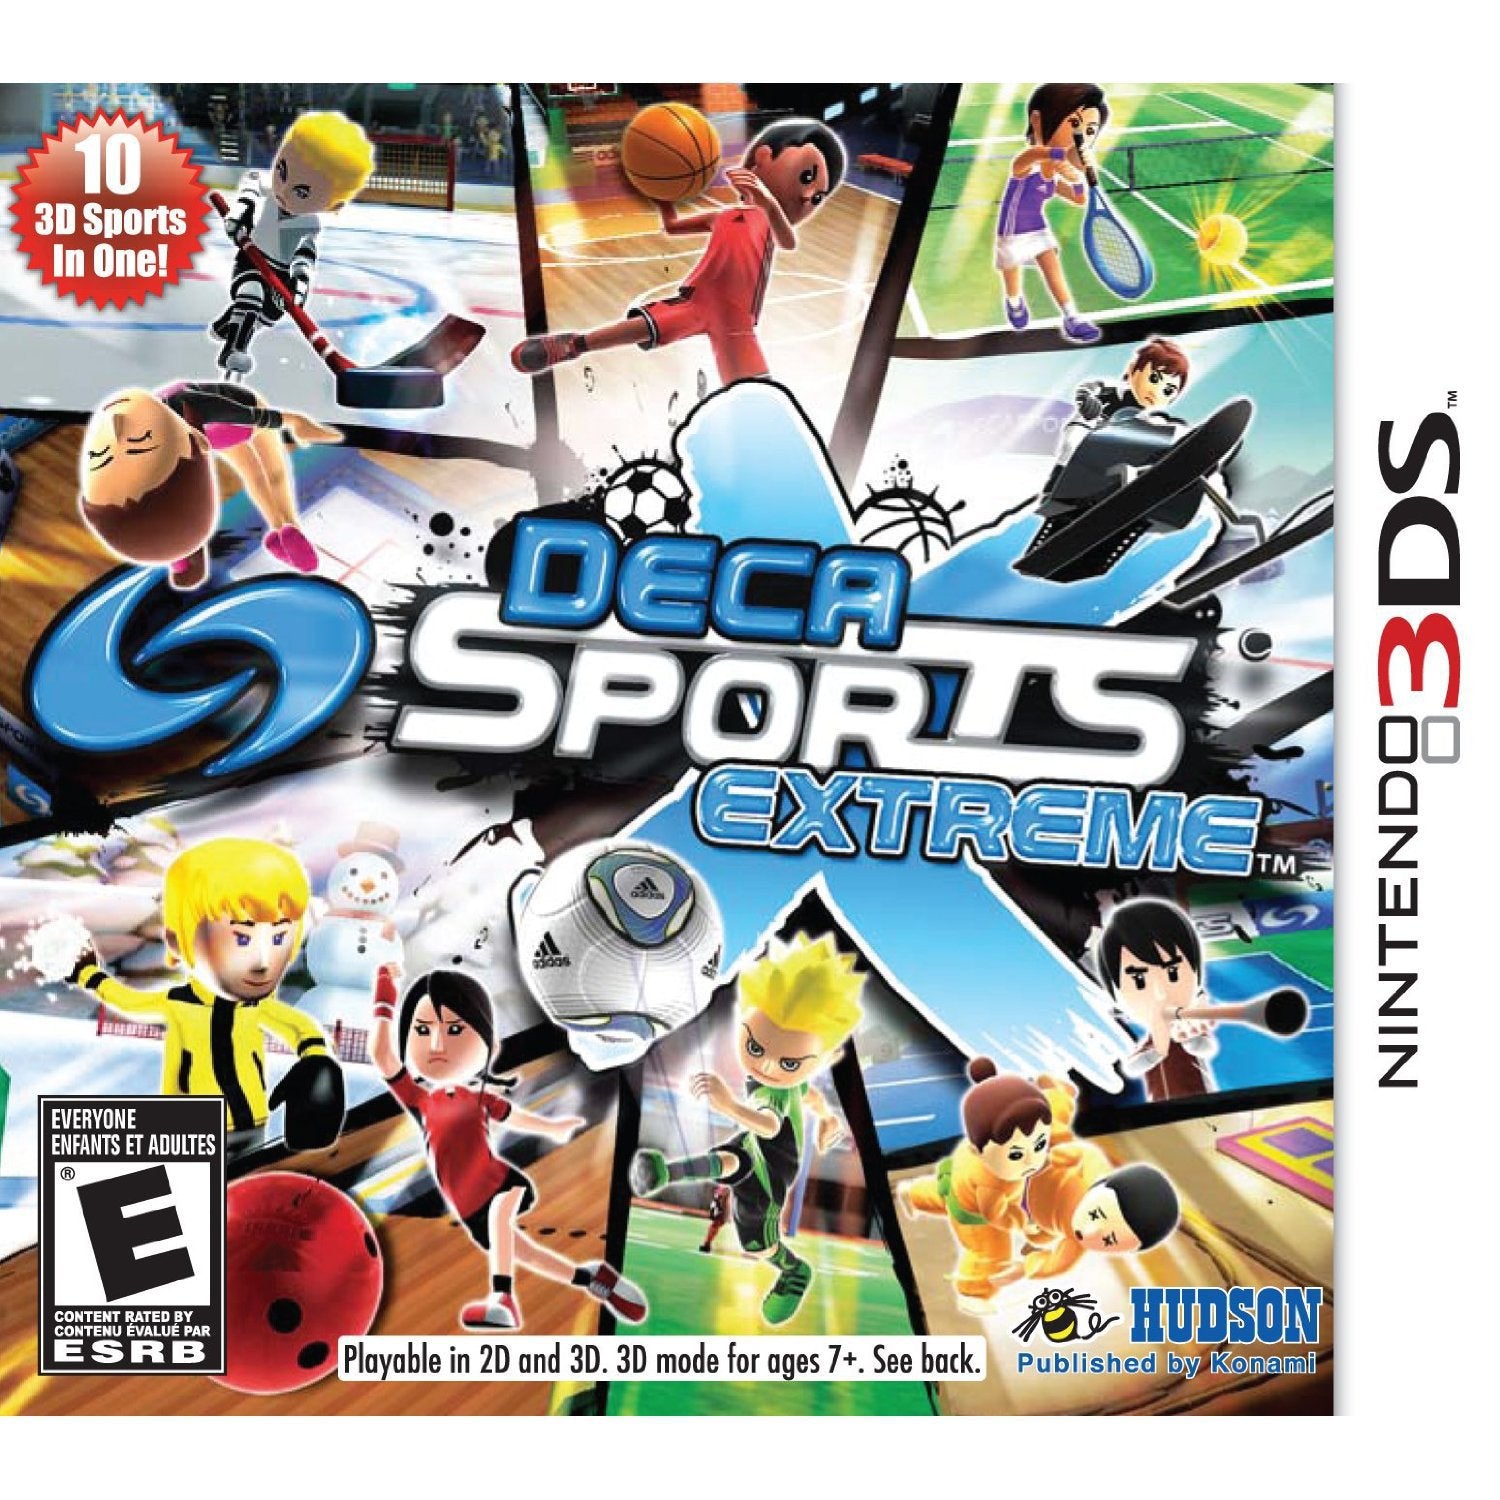 Deca Sports Extreme - Nintendo 3DS - image 1 of 2